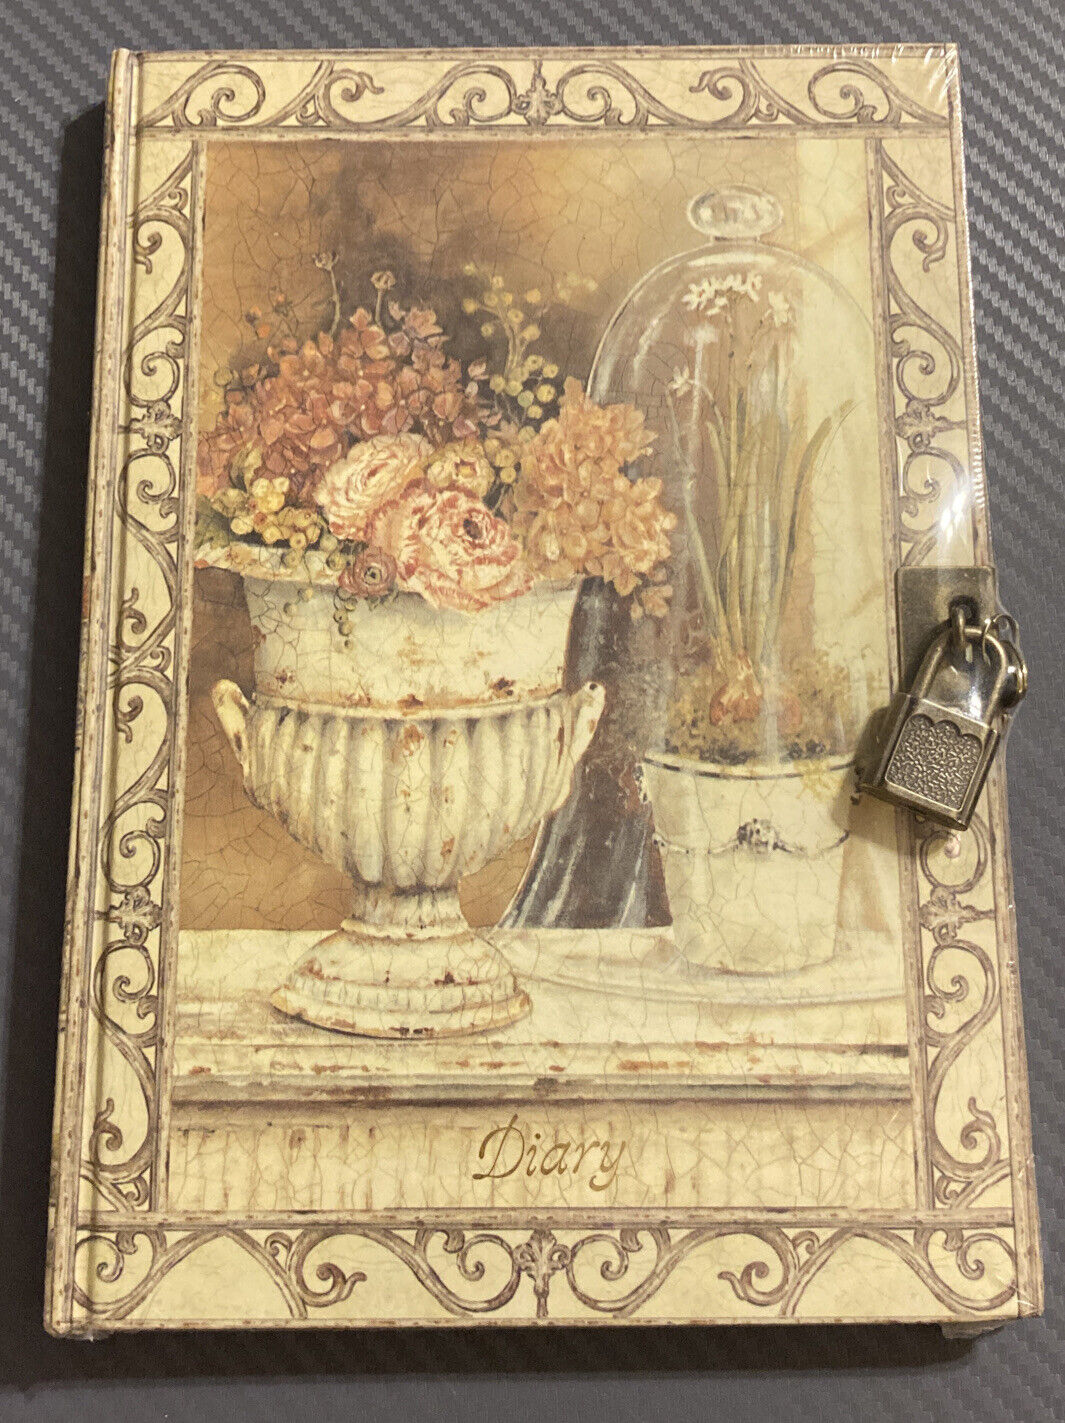 Max 47% OFF Catherine white art Jacksonville Mall in motion diary and Lock key 2003 new with